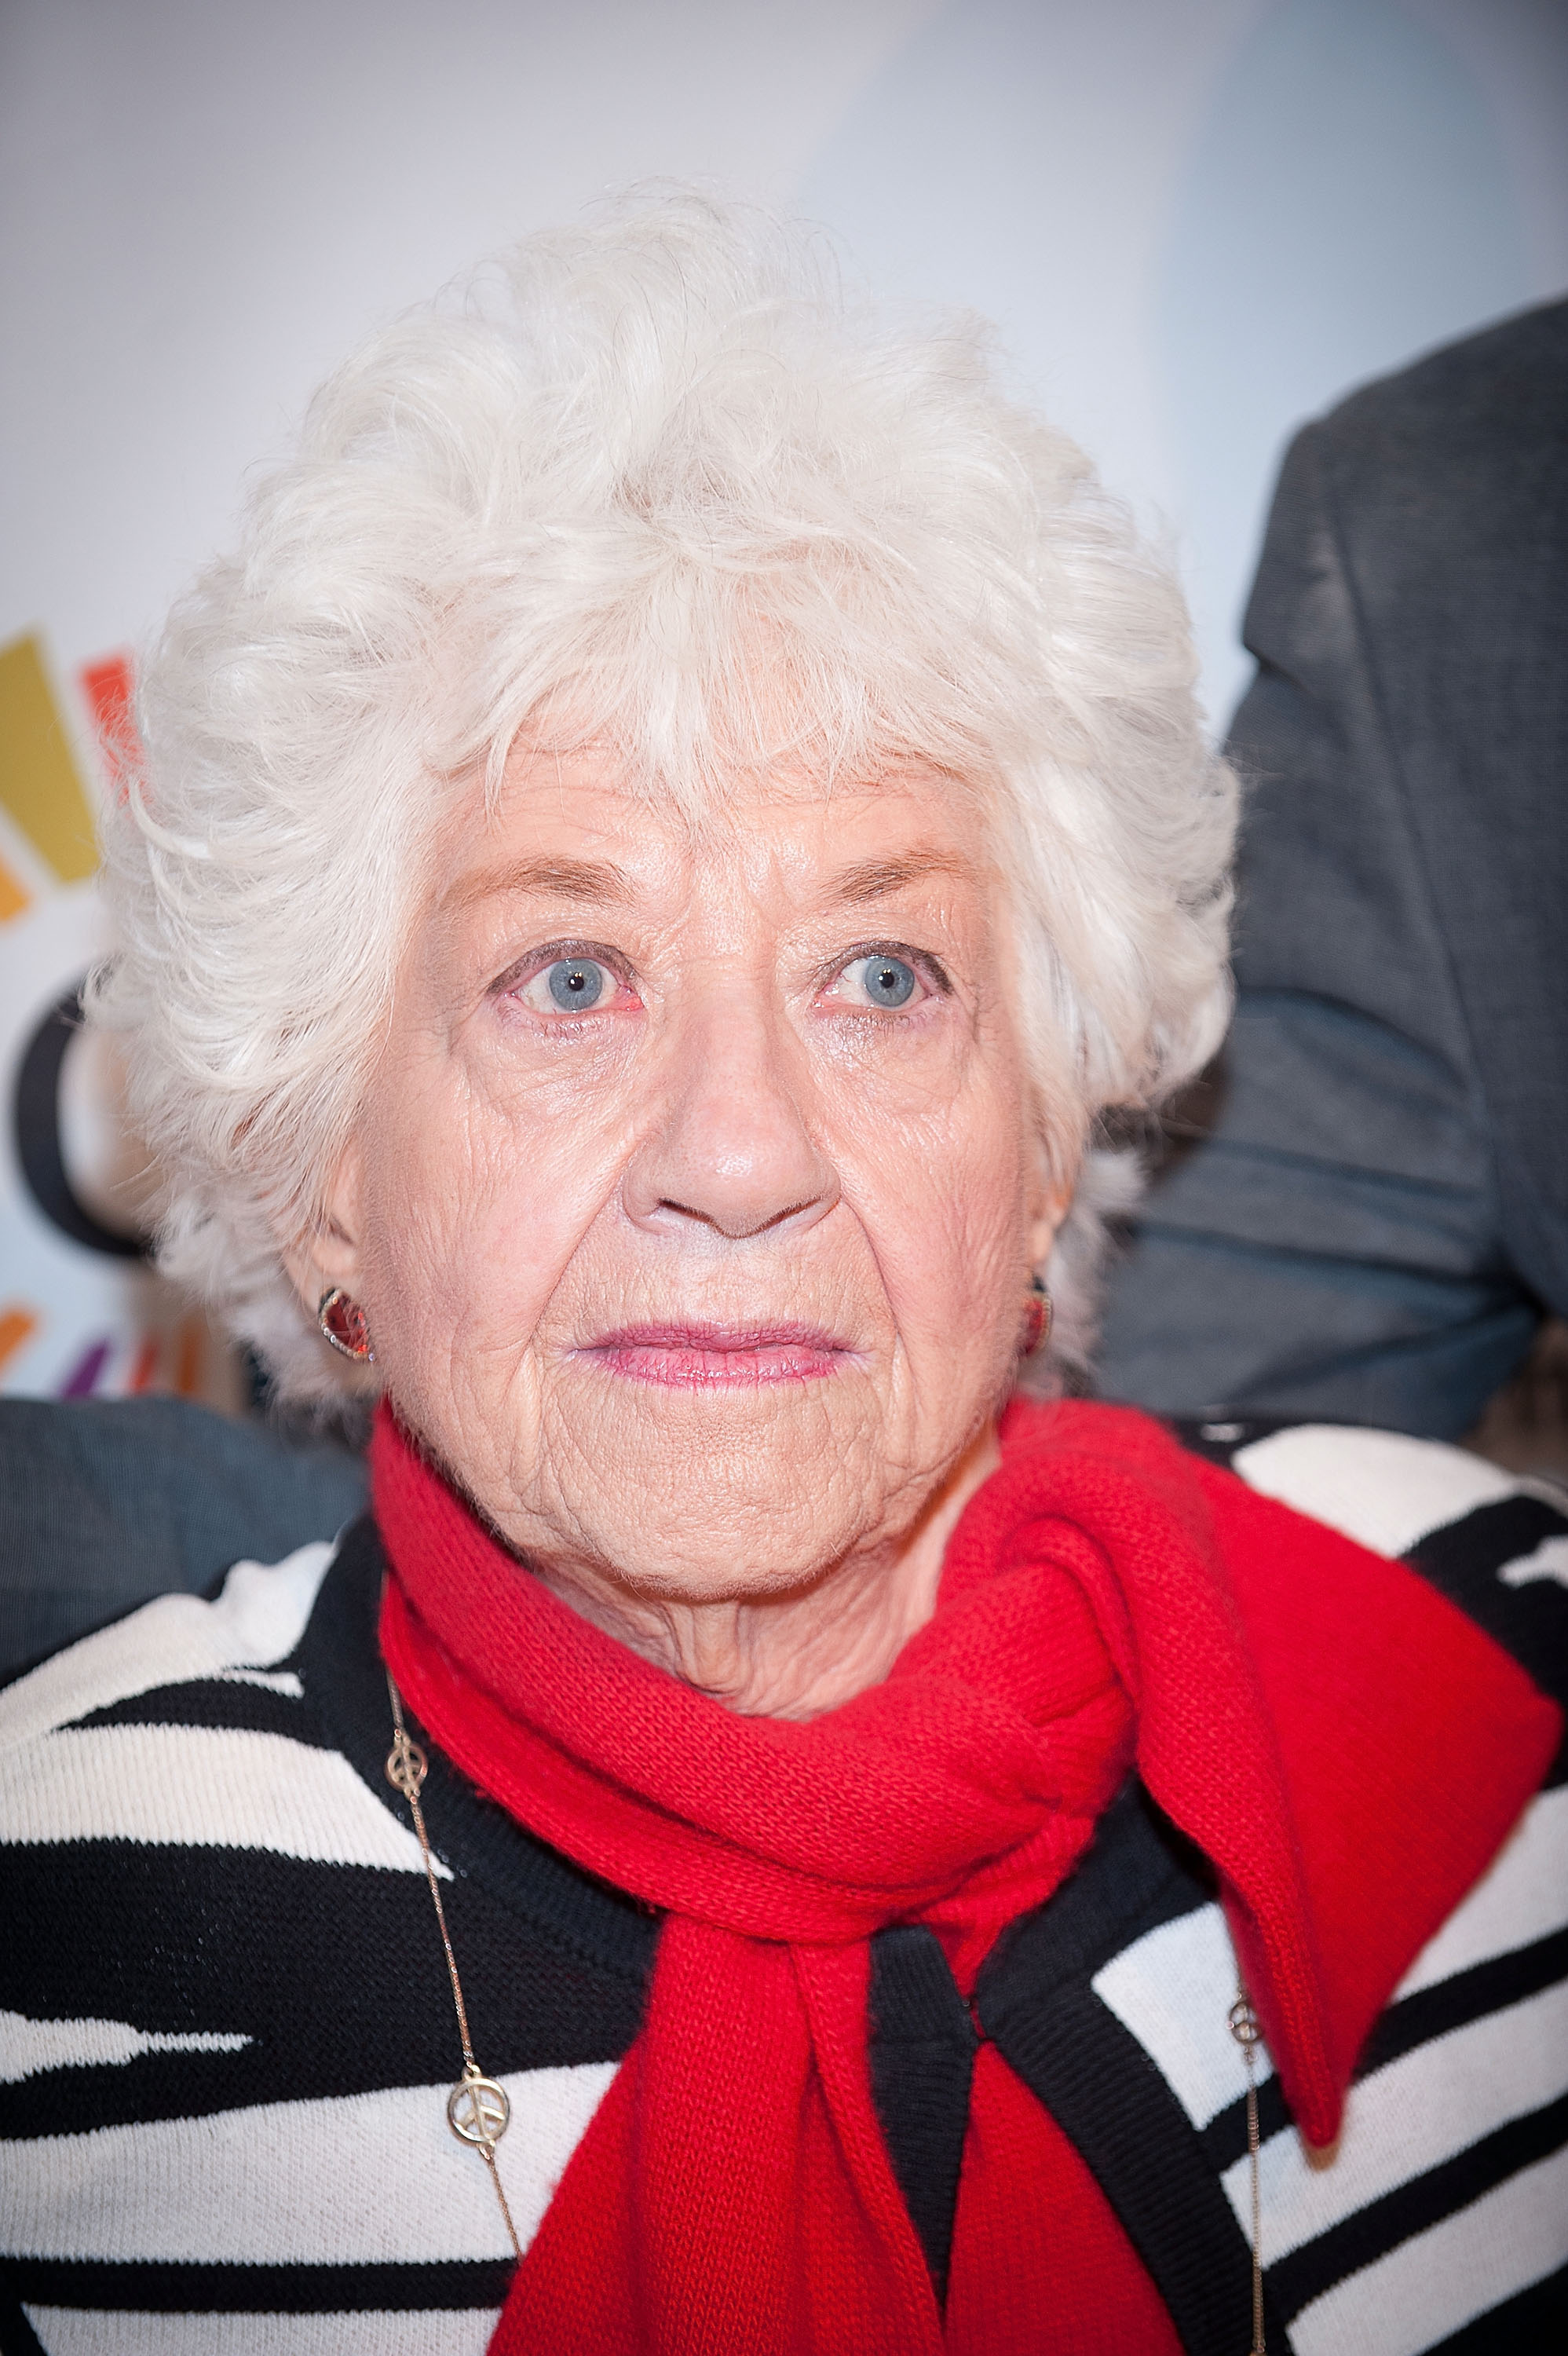  Charlotte Rae attends The Center Dinner to benefit The Lesbian, Gay, Bisexual & Transgender Community Center held at the Metropolitan Pavilion on March 21, 2011 in New York City. | Source: Getty Images